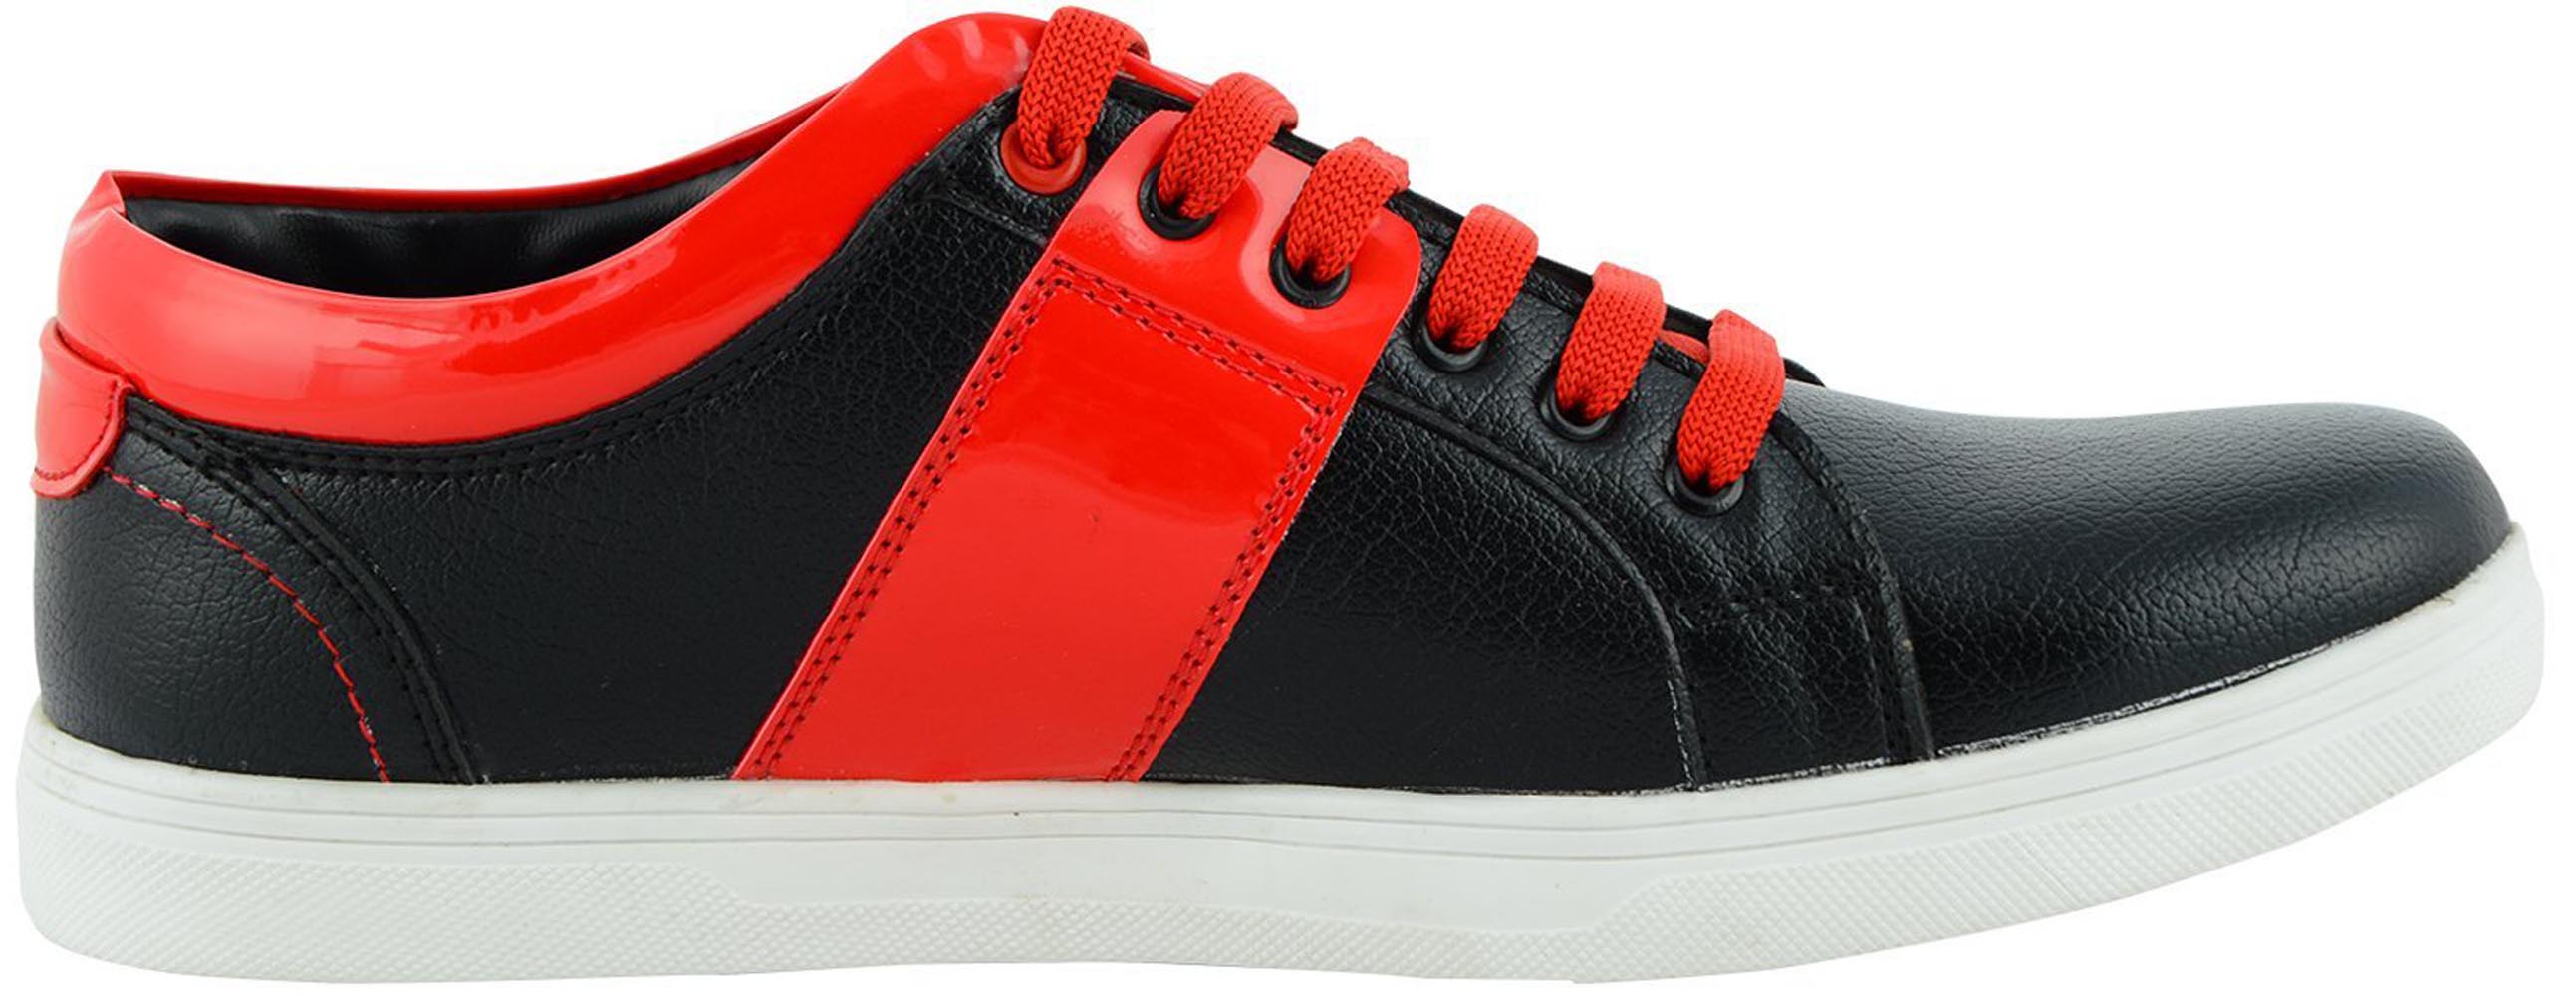 Buy Footgear Mens Casual Shoes (M-CA-4-Red) Online @ ₹1199 from ShopClues